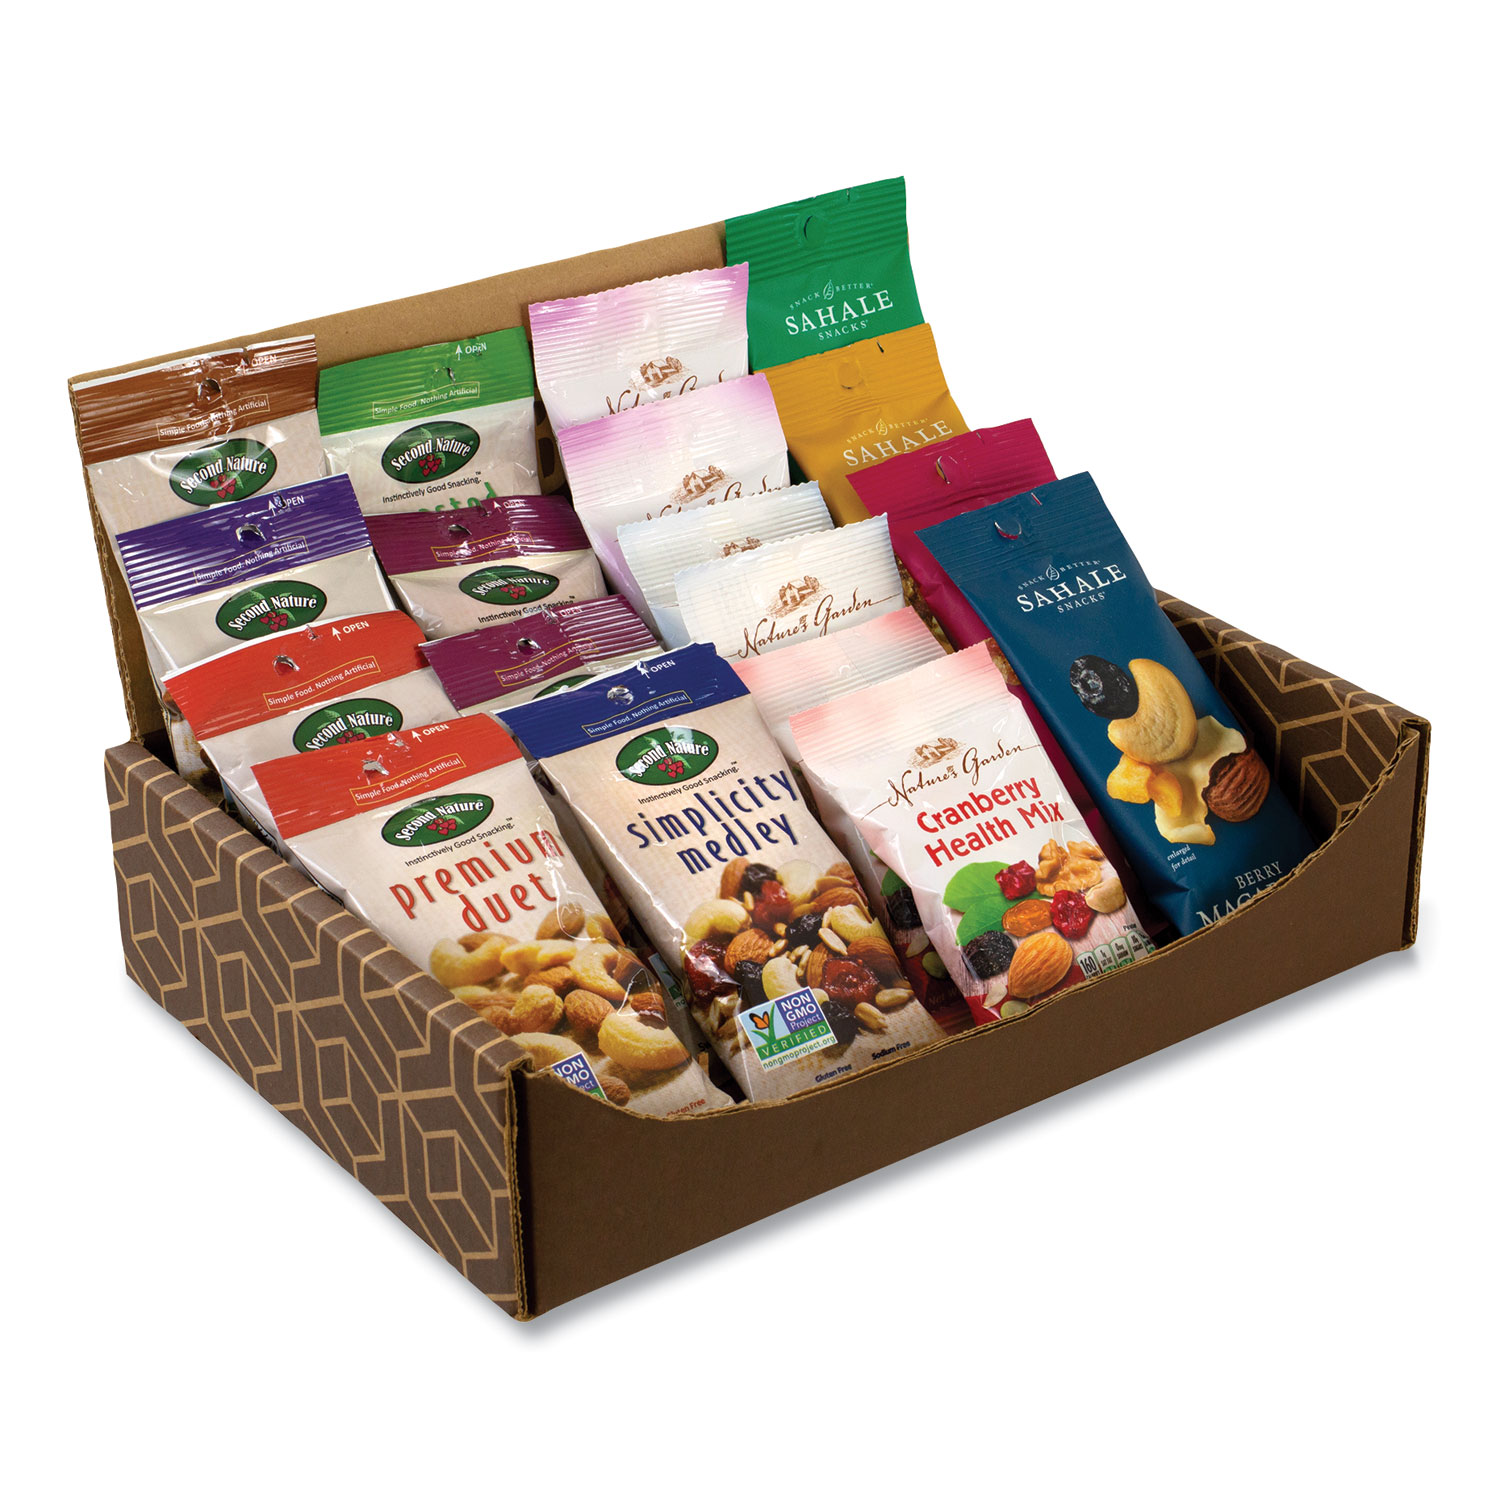  Snack Box Pros 70000046 Healthy Mixed Nuts Snack Box, 18 Assorted Snacks, Free Delivery in 1-4 Business Days (GRR70000046) 